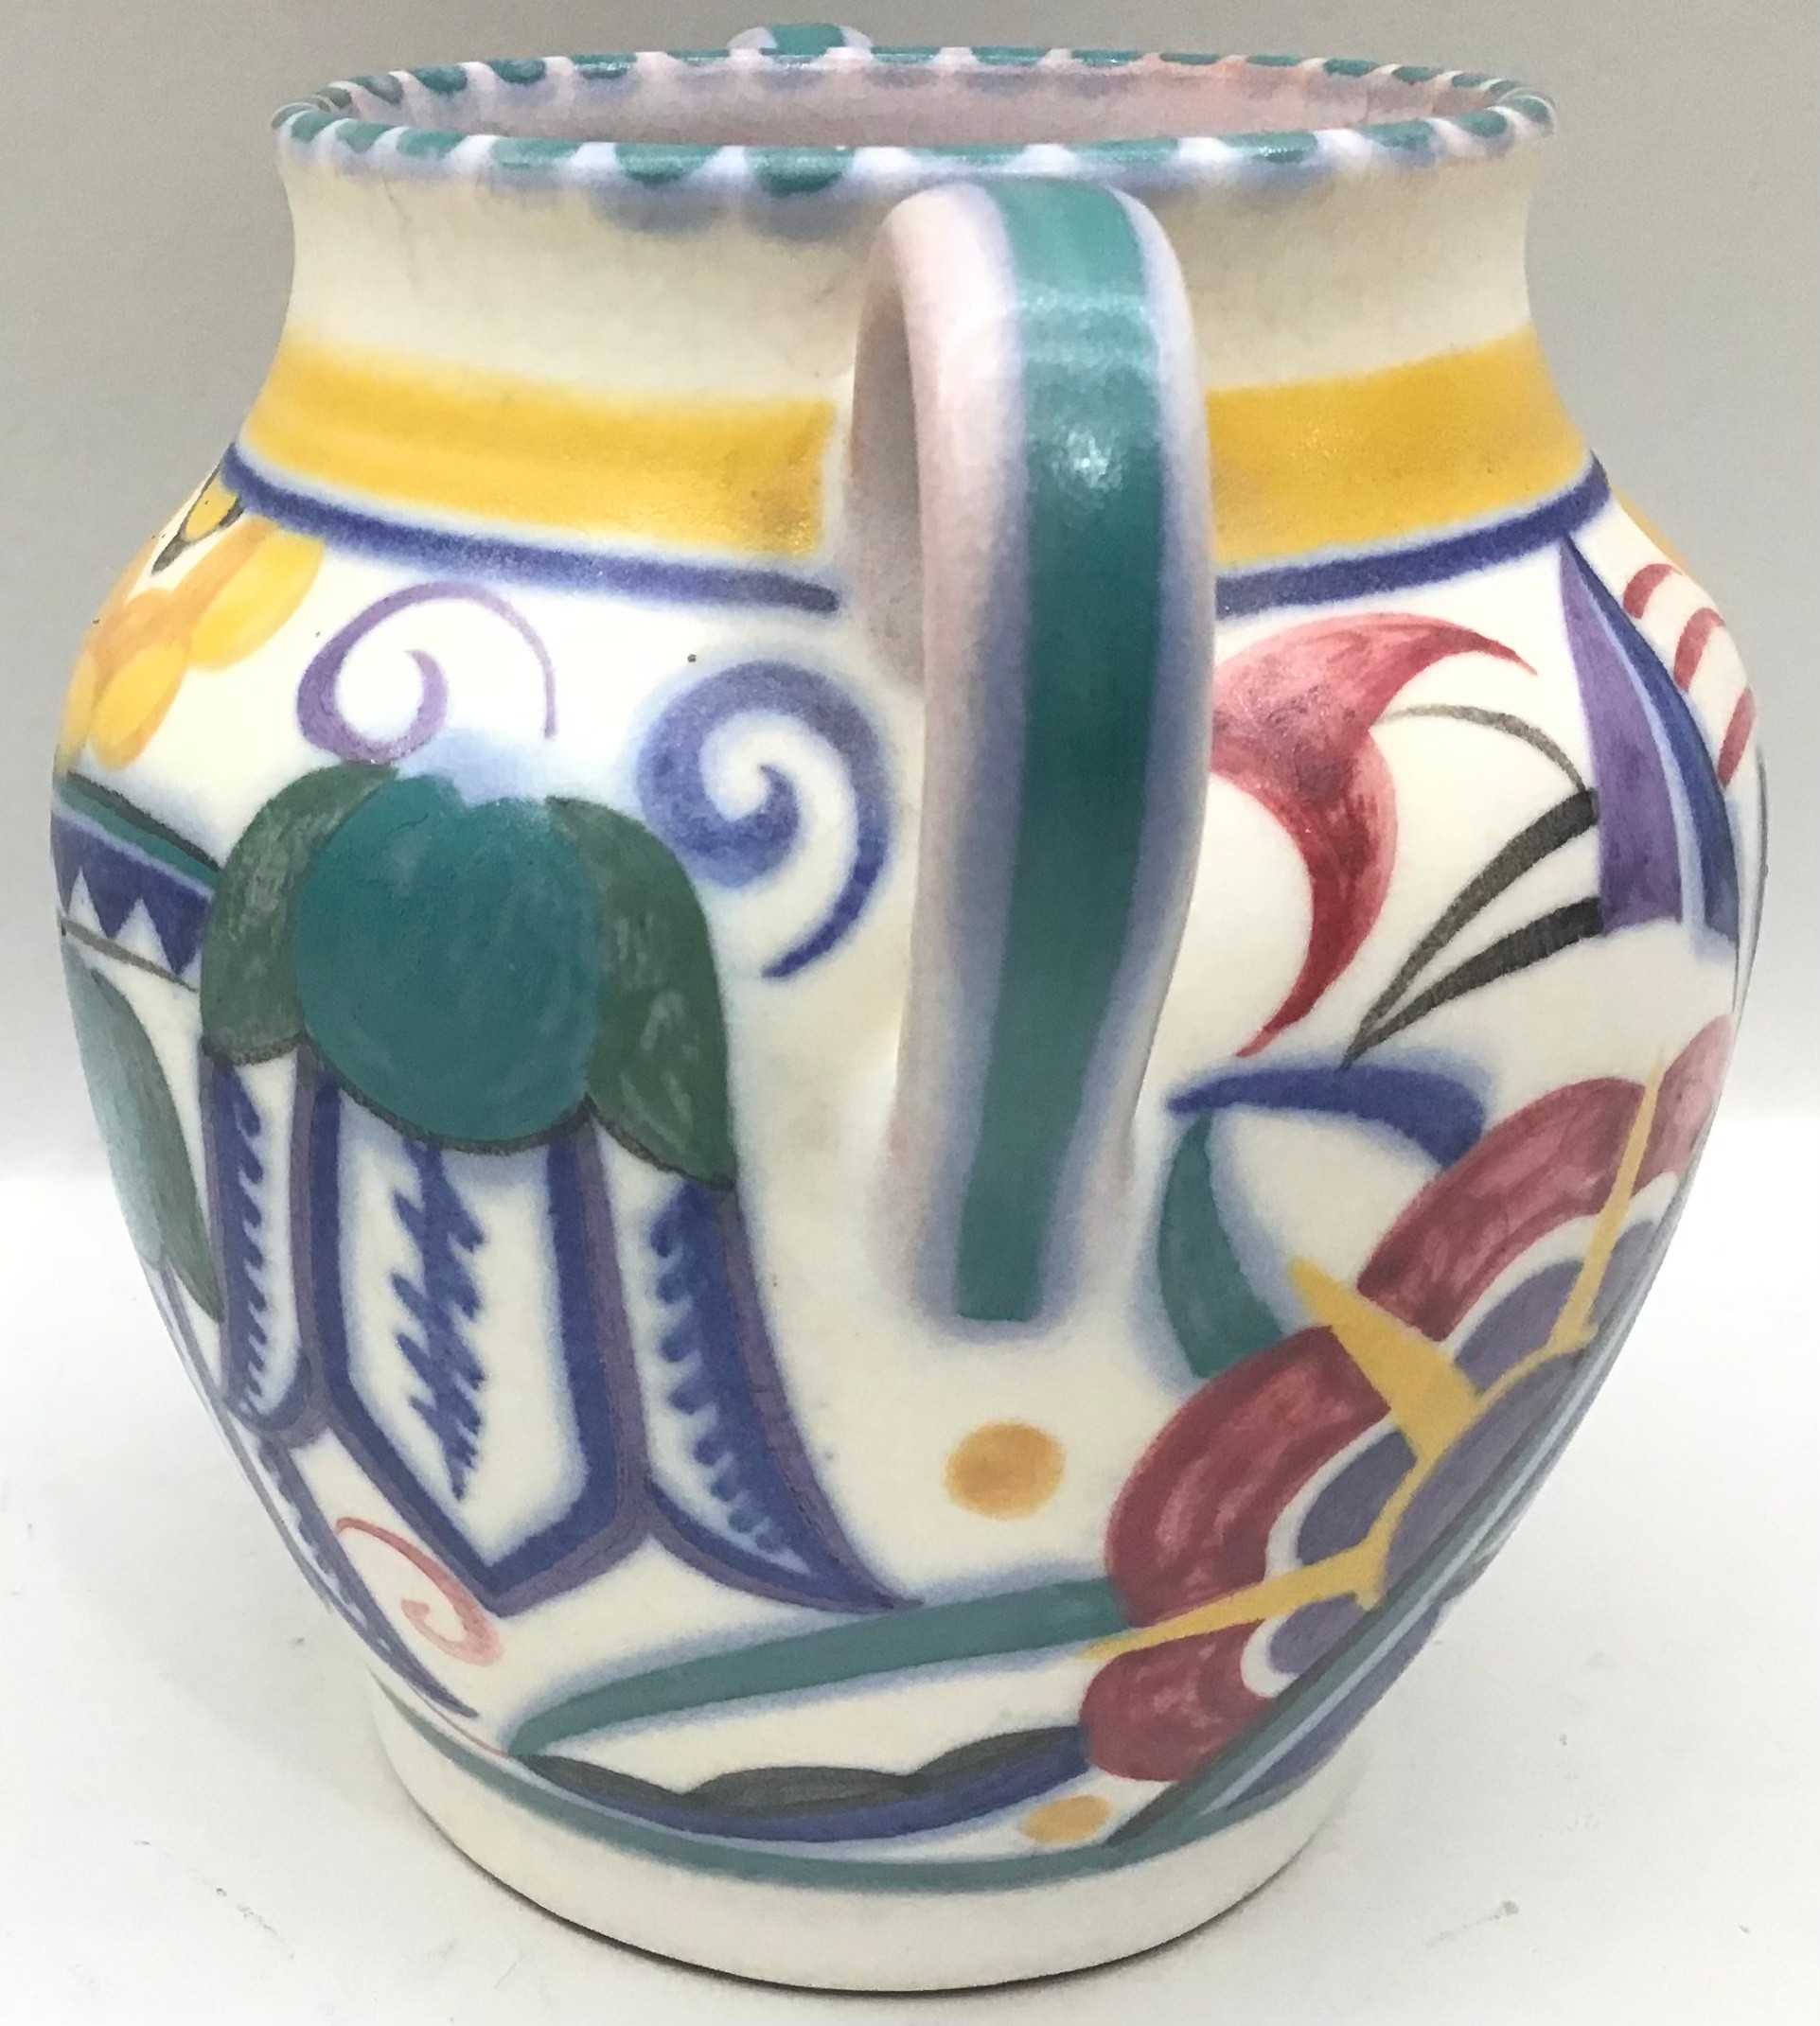 Poole Pottery shape 401 TY pattern twin handled vase decorated by Marian Heath 4.9" high. - Image 4 of 6